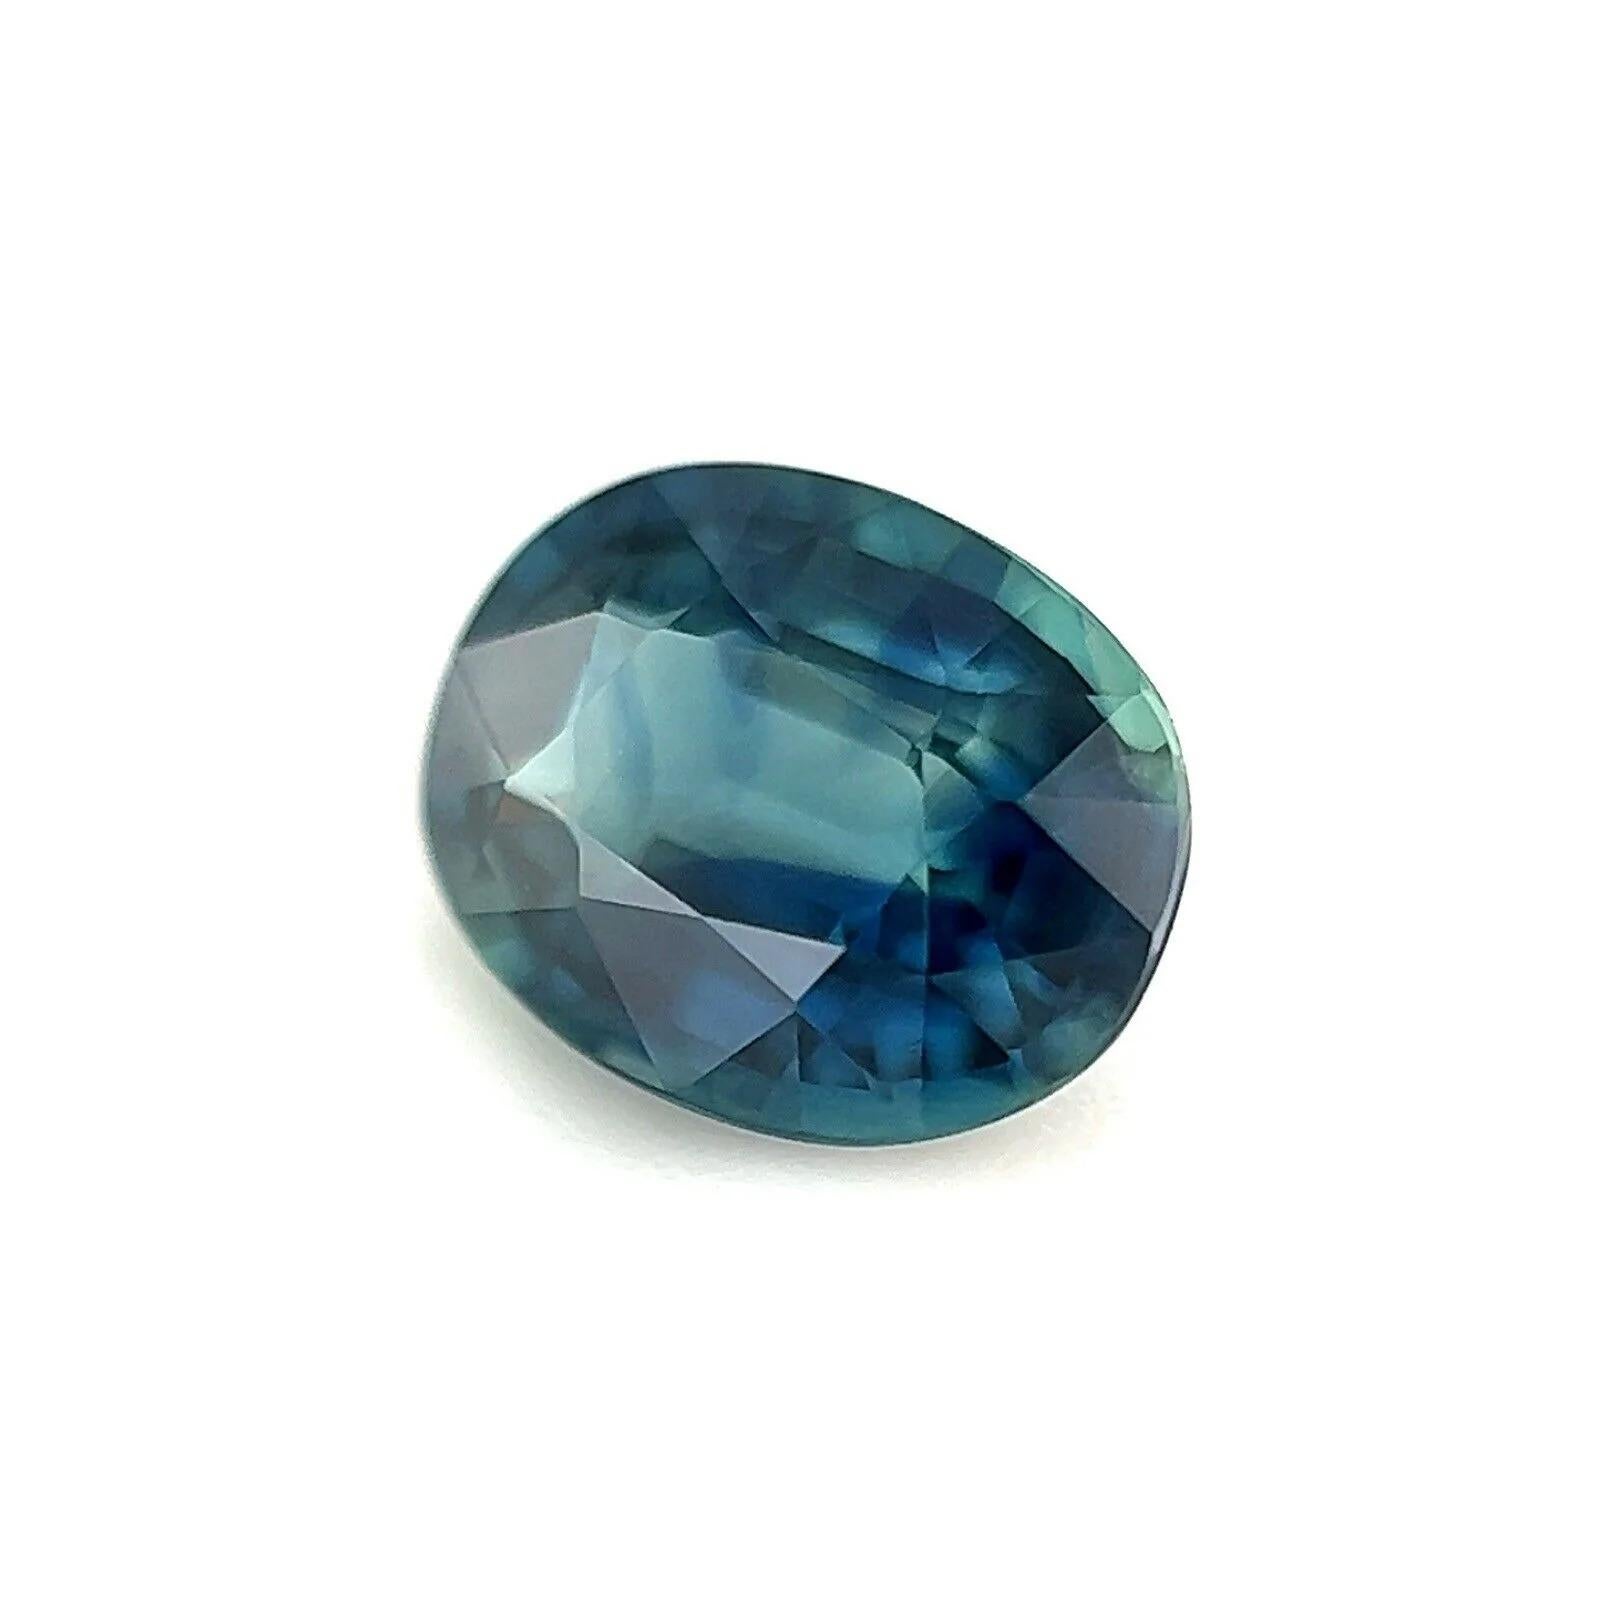 1.00ct Australian Blue Sapphire Fine Natural Oval Cut Loose Rare Gem 6.7x5mm

Natural Blue Australian Sapphire Gemstone.
1.00 Carat with a deep blue colour and good clarity. Only some small natural inclusions visible when looking closely. Also has a